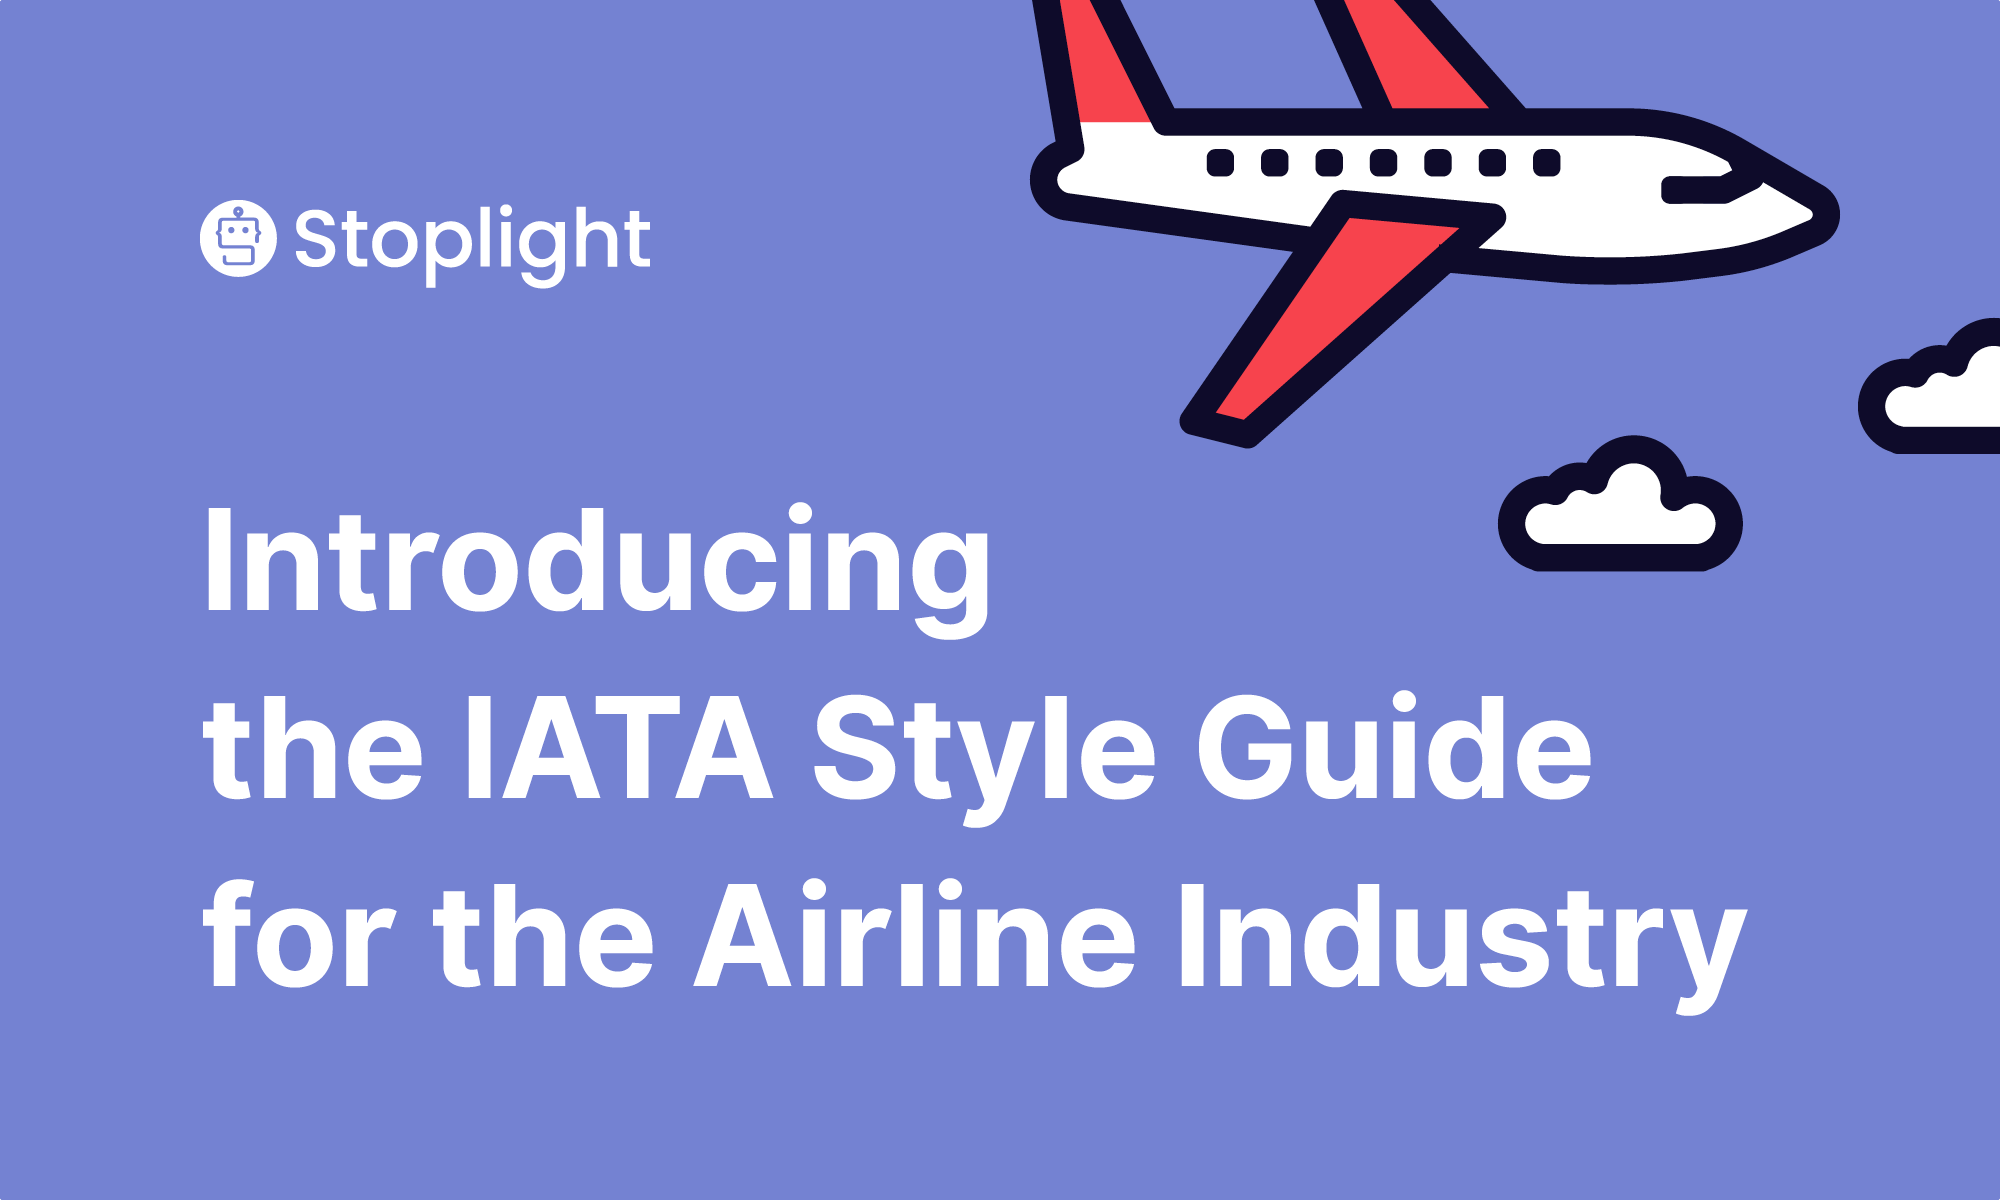 Introducing the IATA Style Guide for the Airline Industry